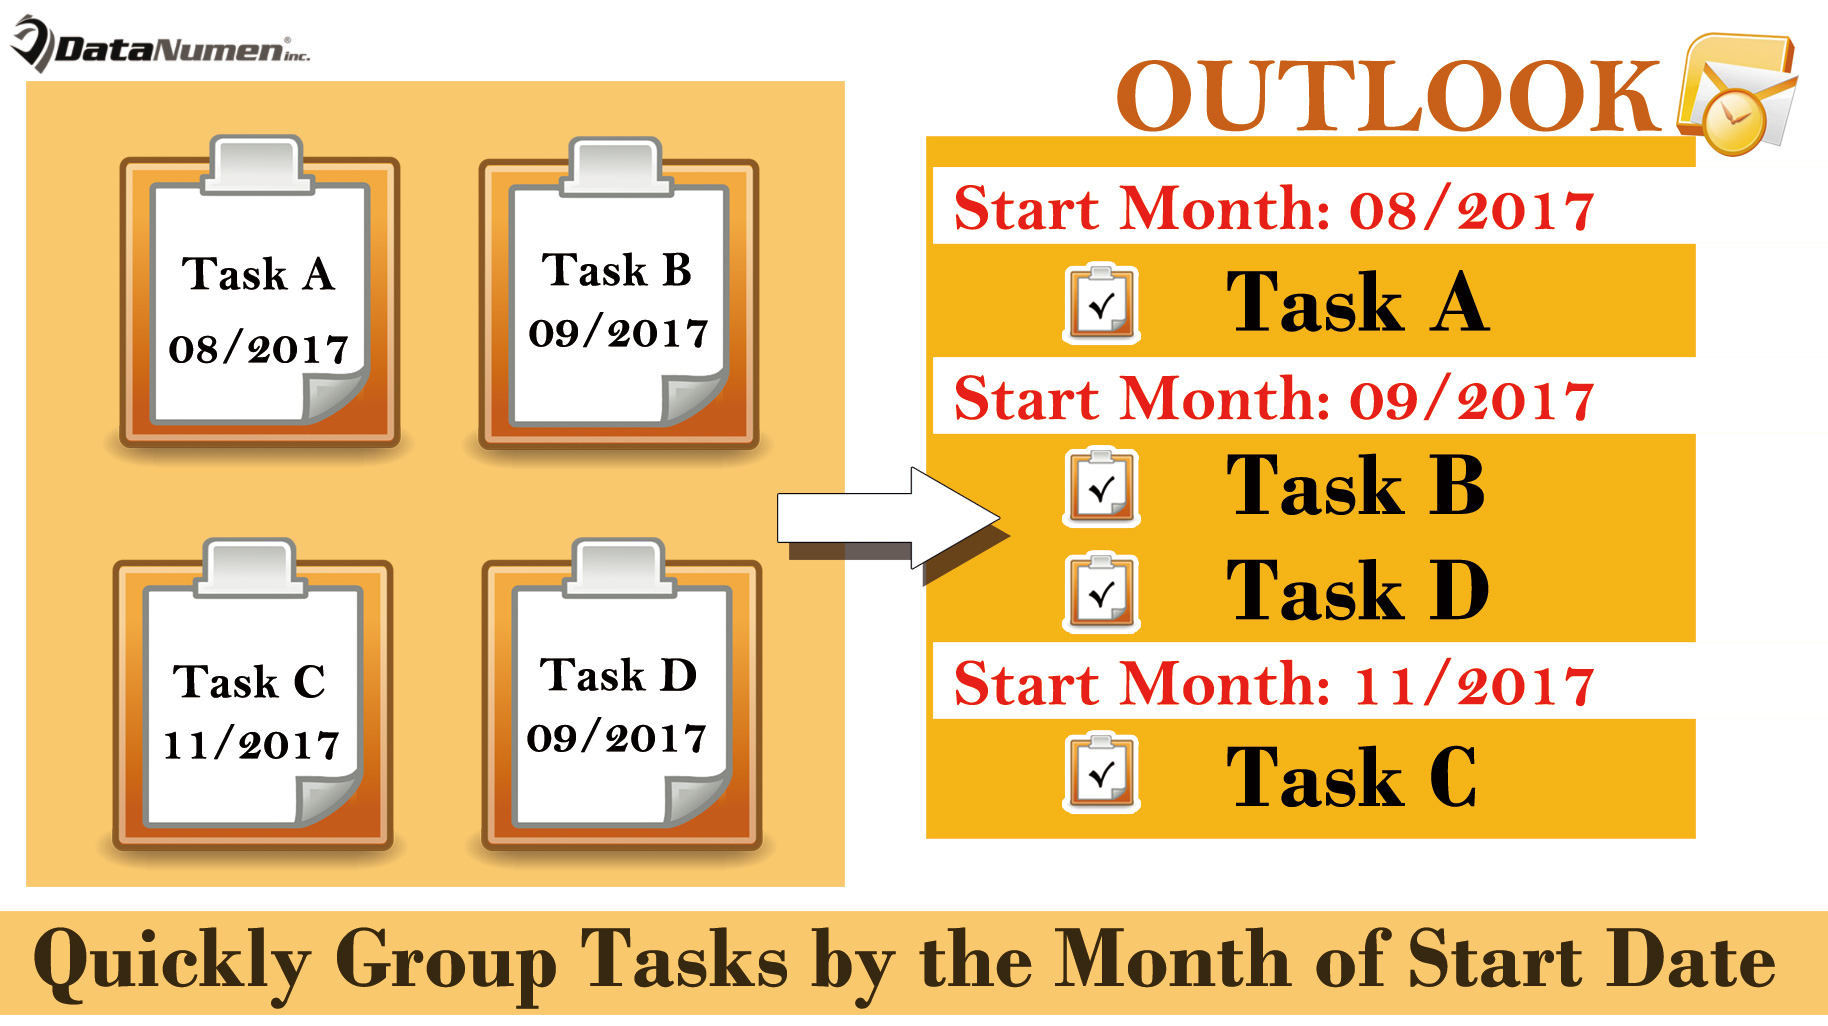 Quickly Group Tasks by the Month of Start Date in Your Outlook